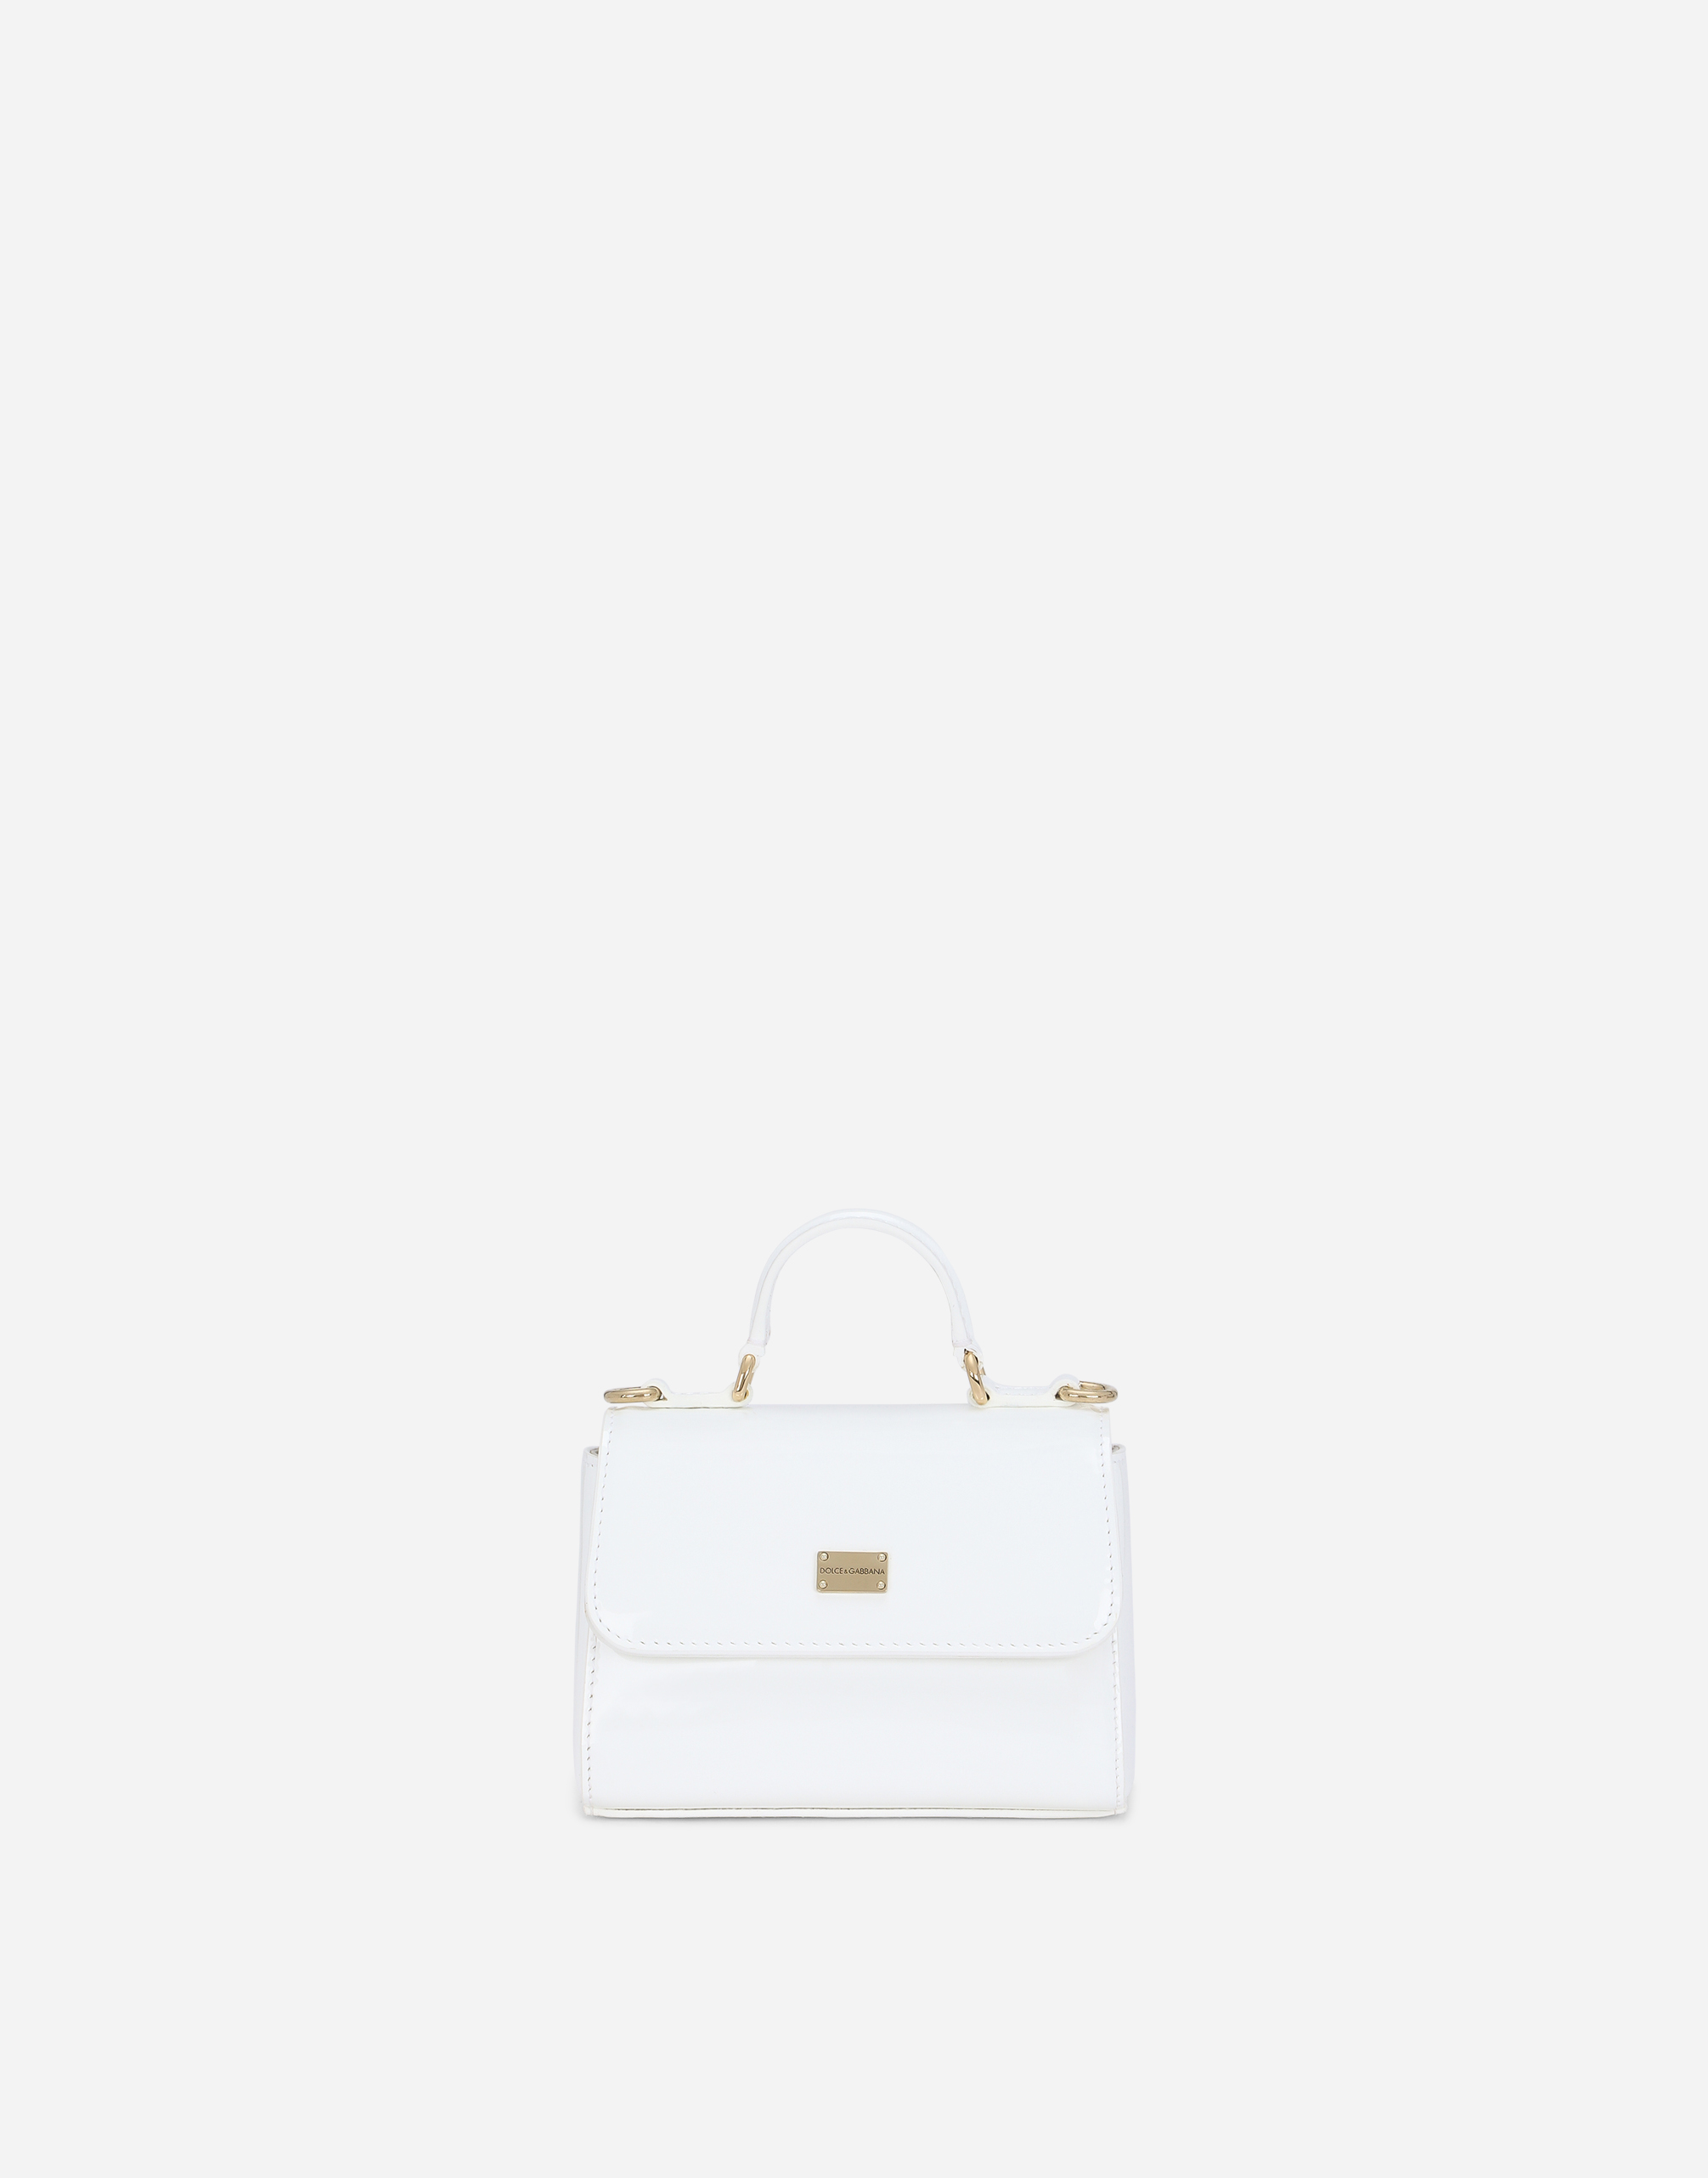 PATENT LEATHER HANDBAG WITH SHOULDER STRAP in White